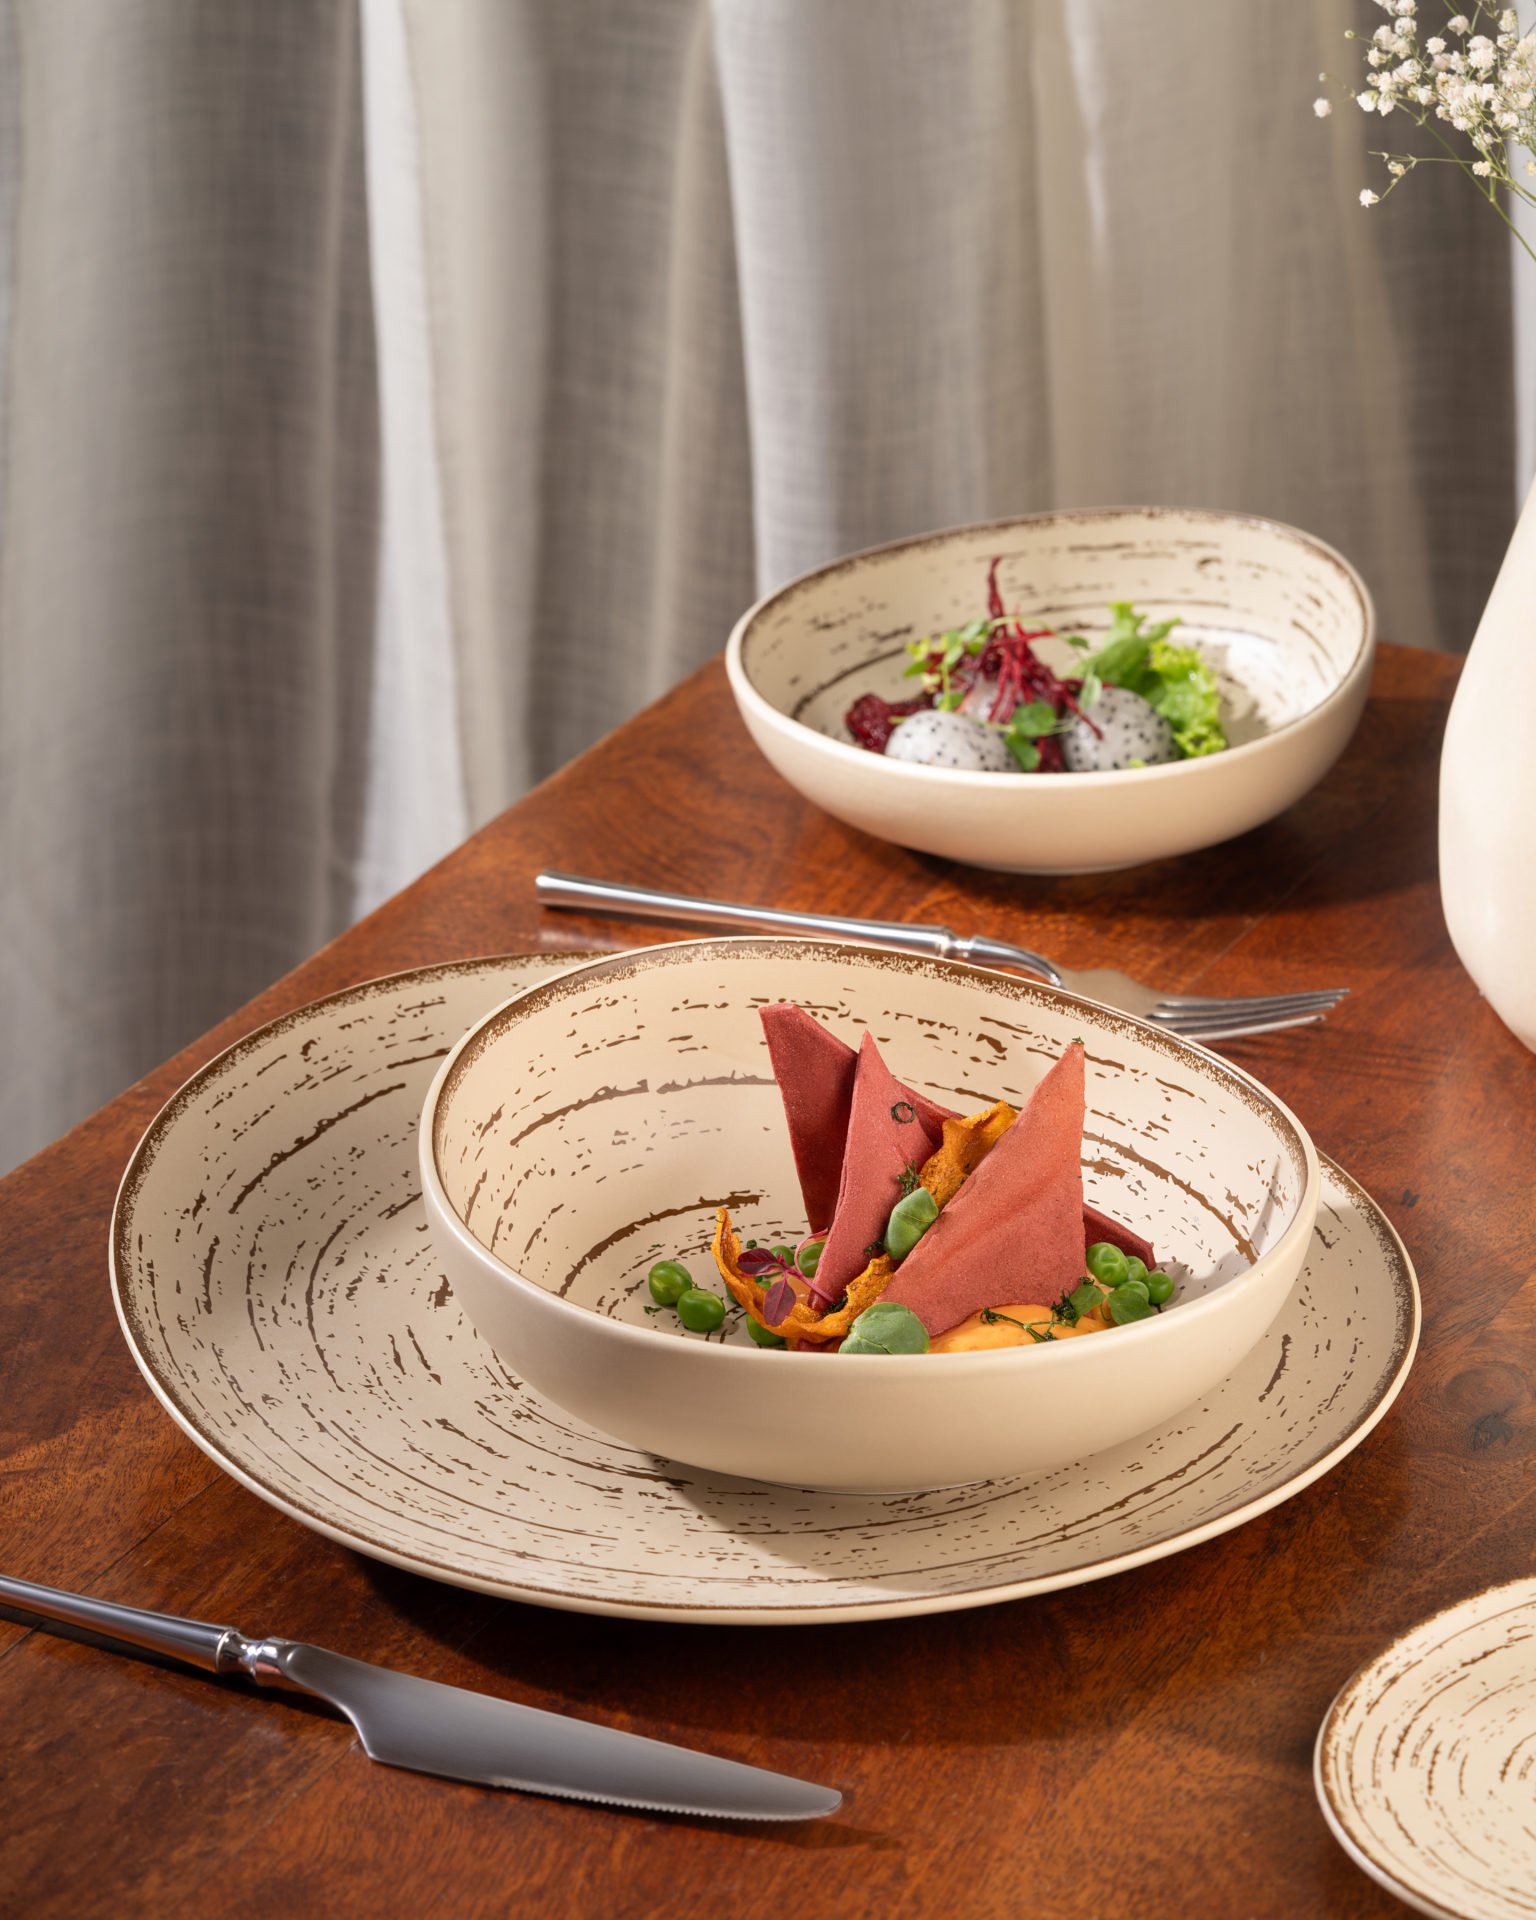 Worldchefs has partnered with Ariane Fine Porcelain, a leading manufacturer of high-quality porcelain tableware